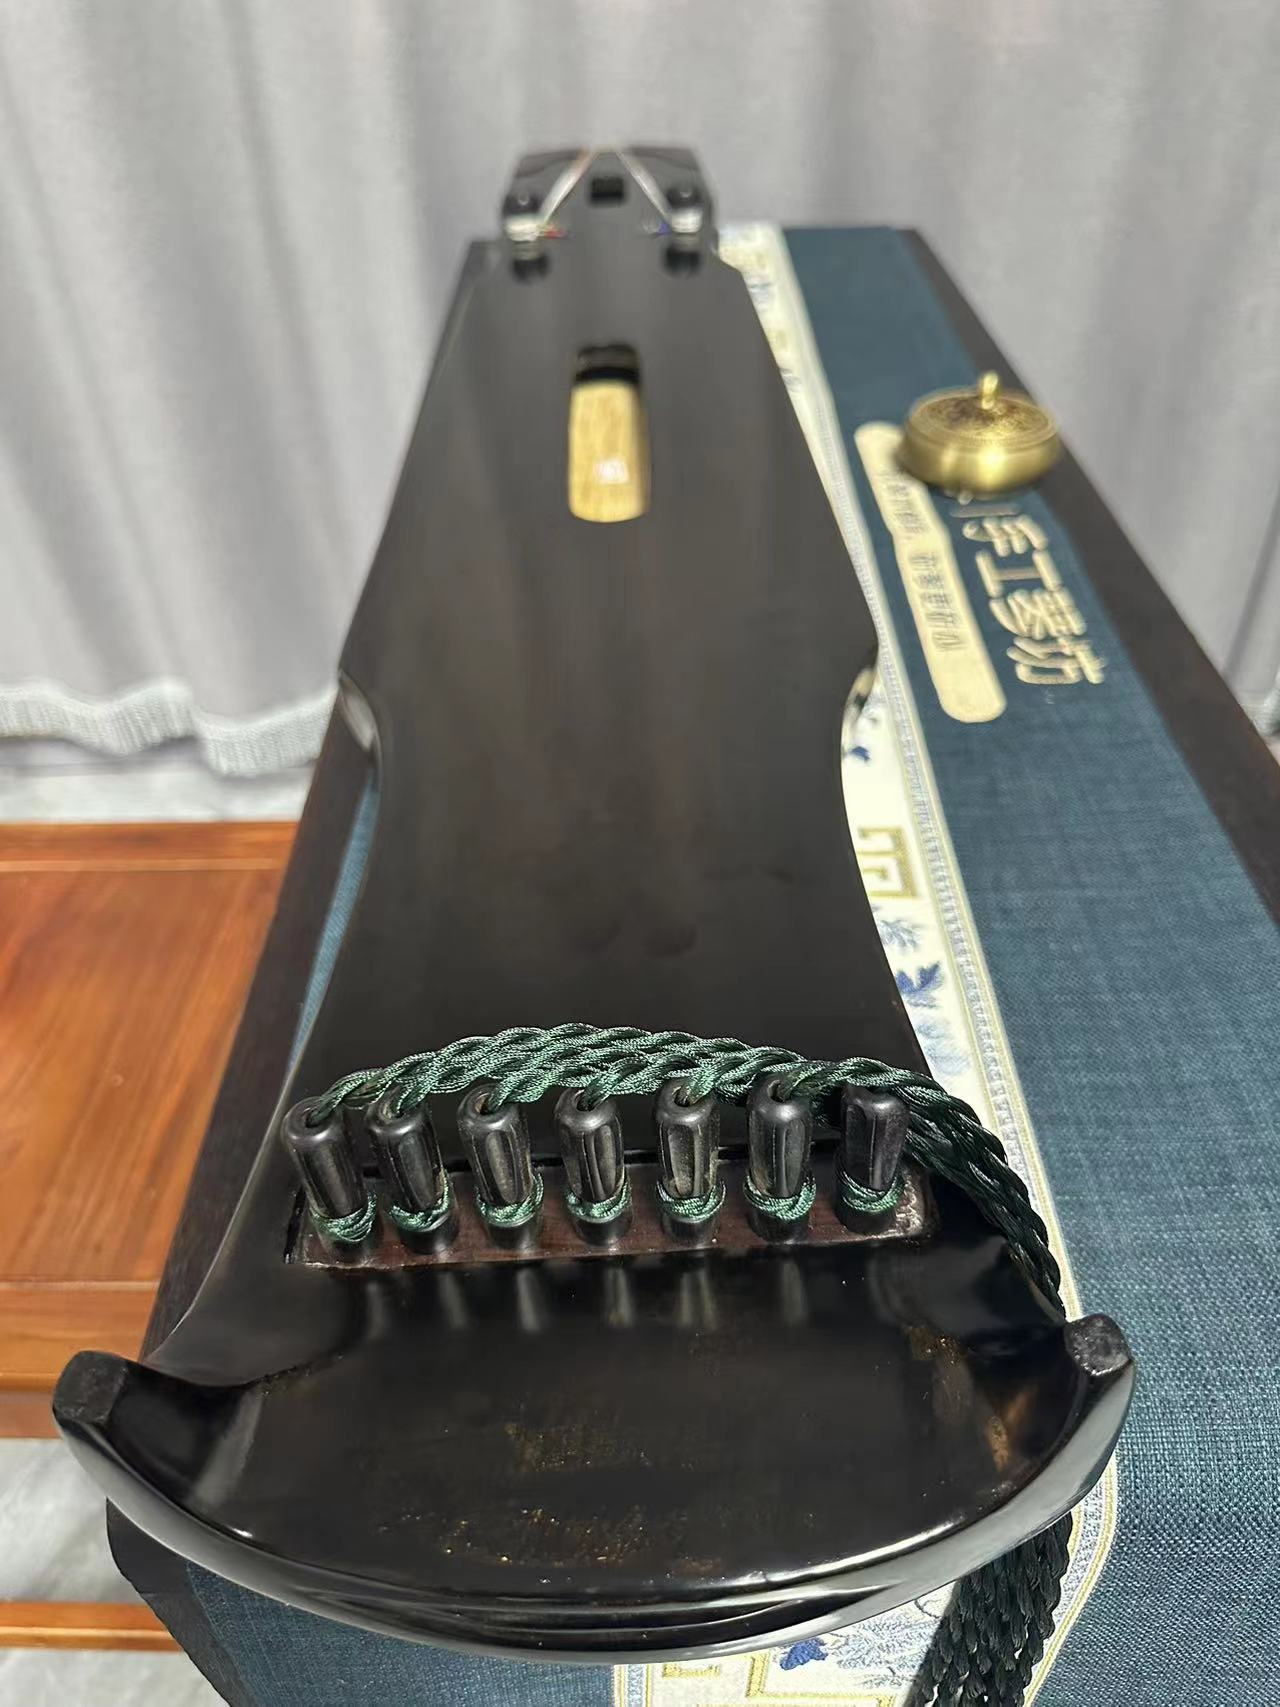 LANDTOM High-Level/Concert level pure handmade Zhongni style 100+ years aged wood Guqin/Chinese zither by famous master